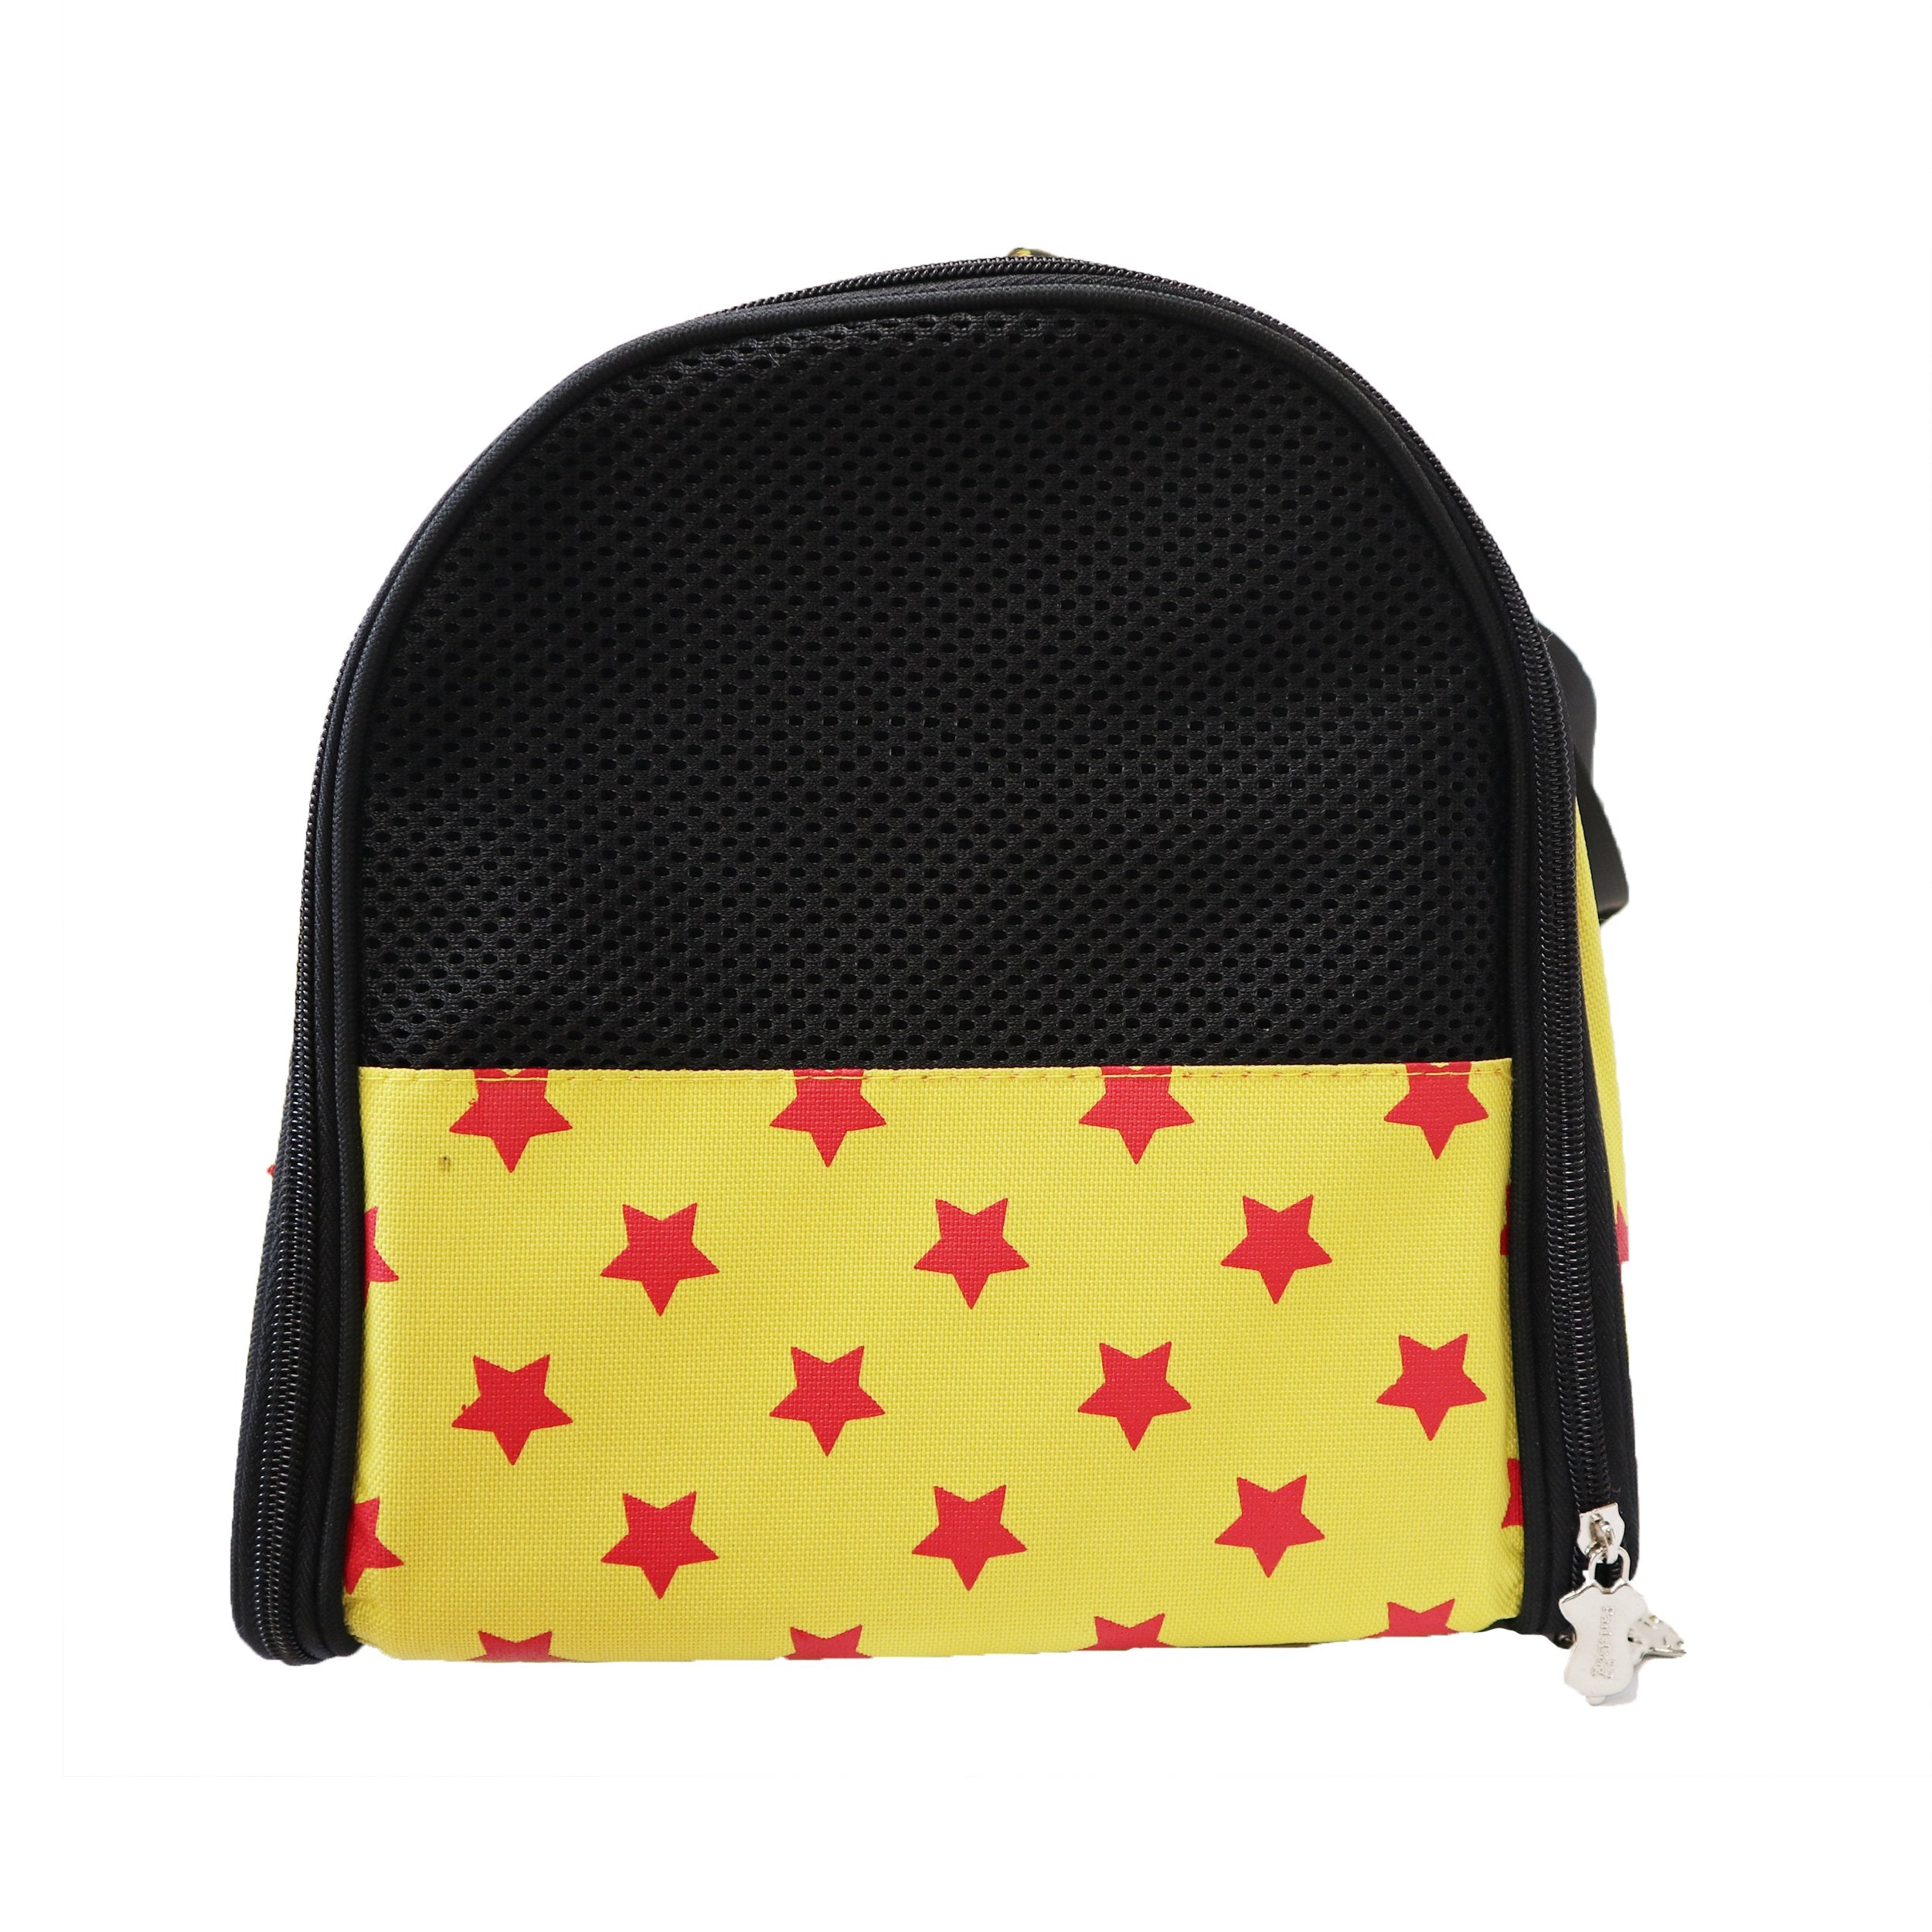 ParisDog Yellow & Red Carrier for Small Dogs and Cats